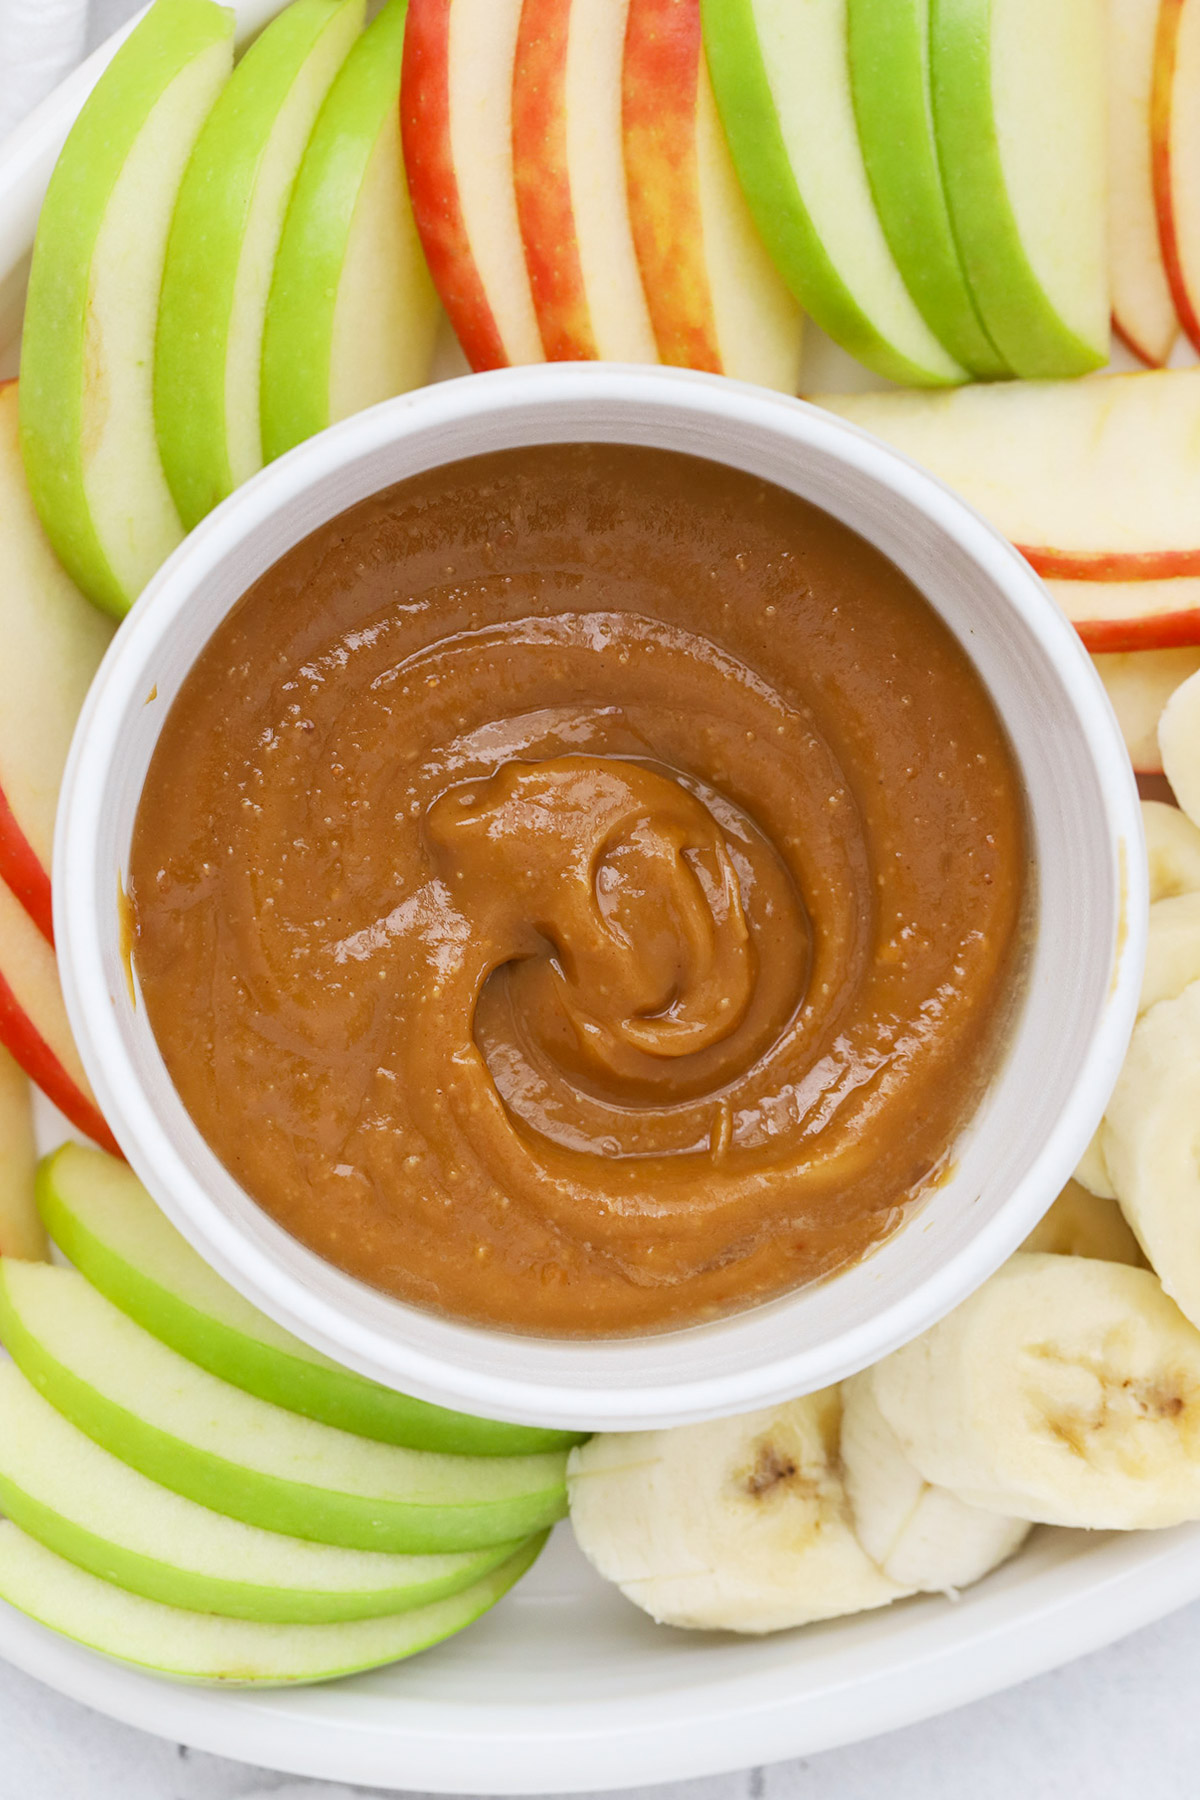 Overhead view of a bowl of peanut butter caramel dip with fresh fruit